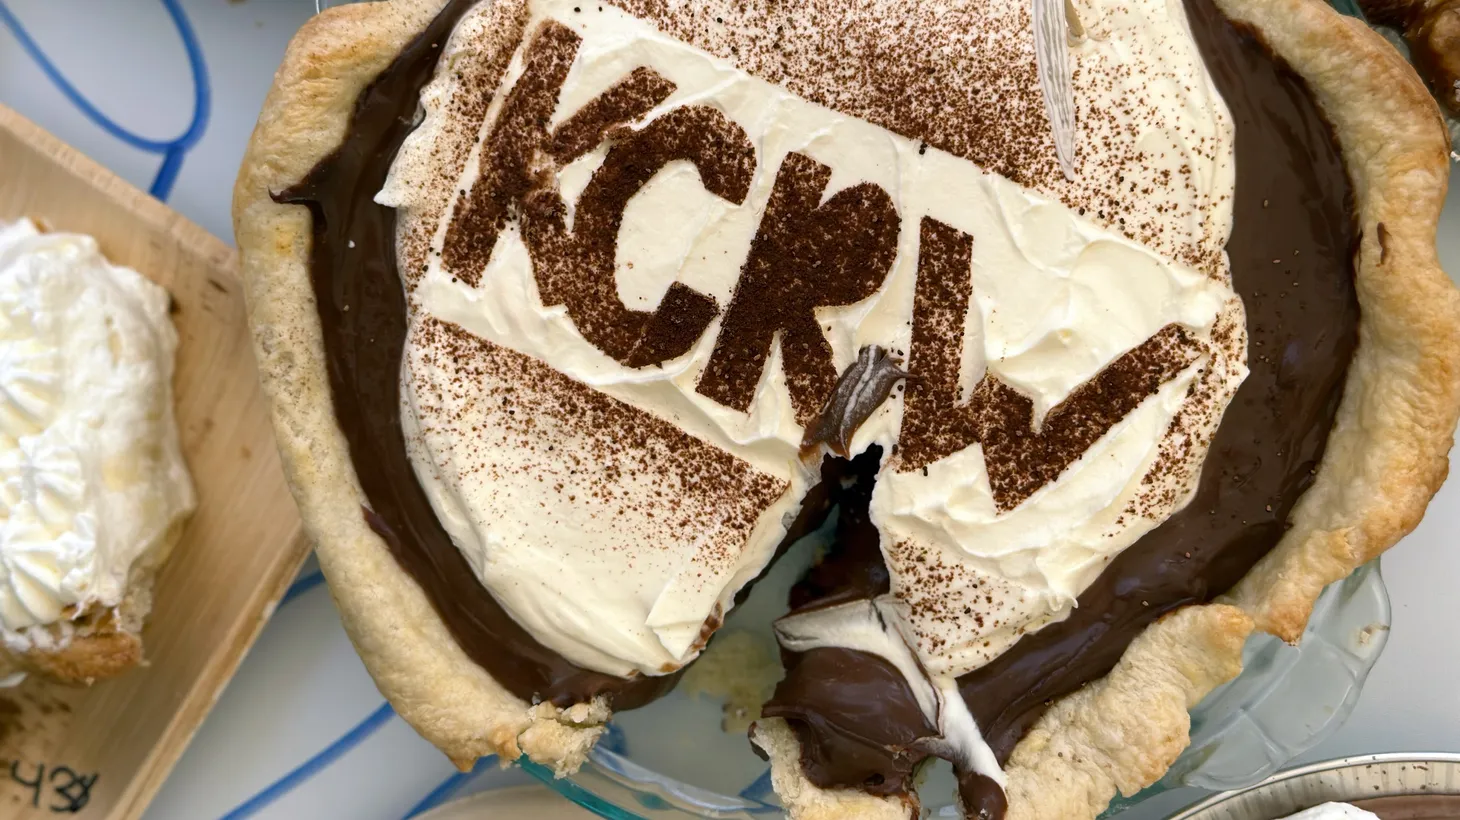 Will you have a better shot of winning PieFest if your entry features the KCRW logo? Only time will tell.